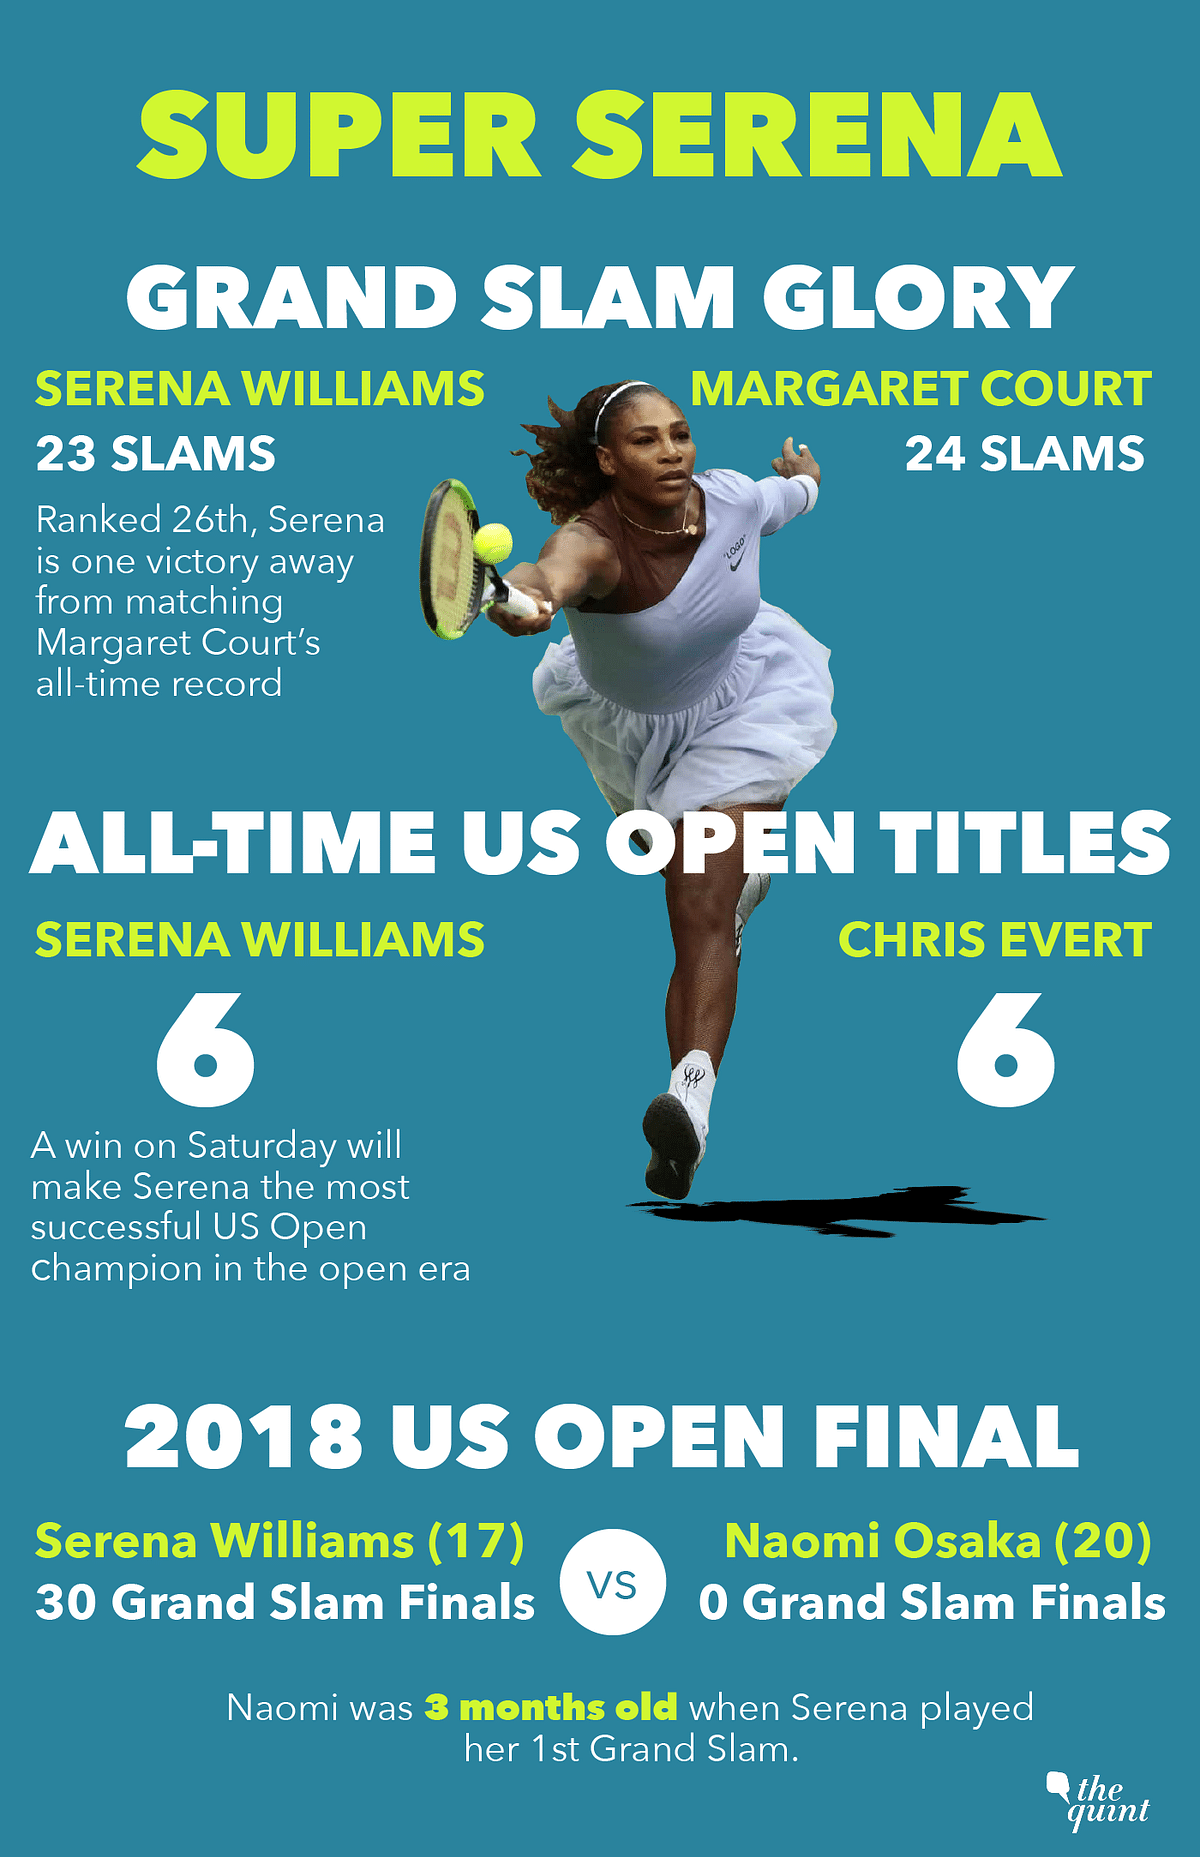 One more win in the US Open, and Serena Williams will win a historical 24th Grand Slam title.